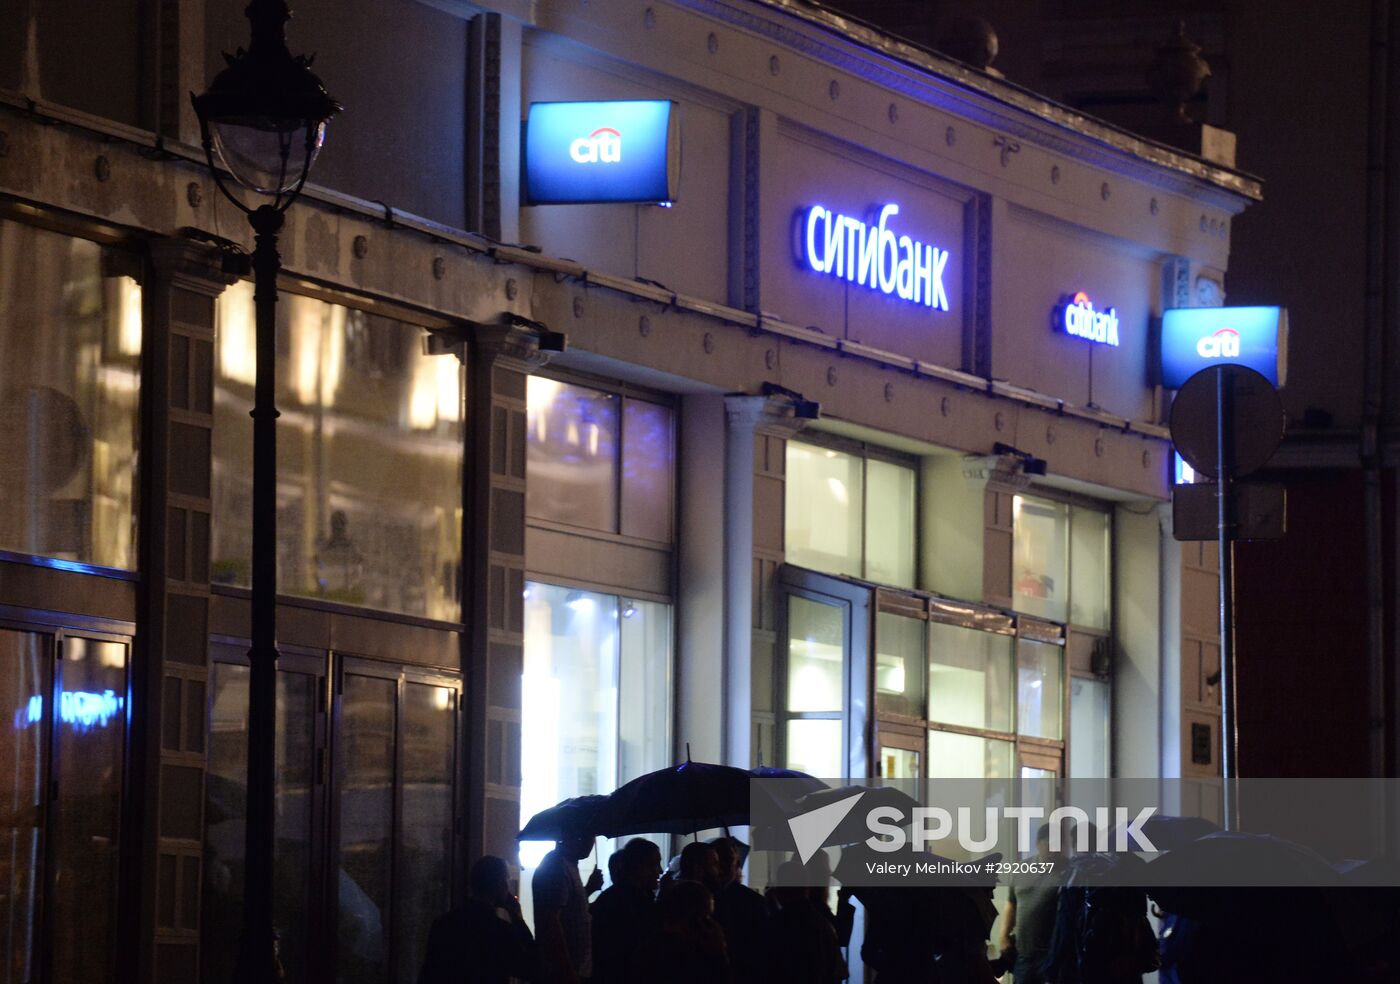 Man threatens to blow up Citibank branch in central Moscow